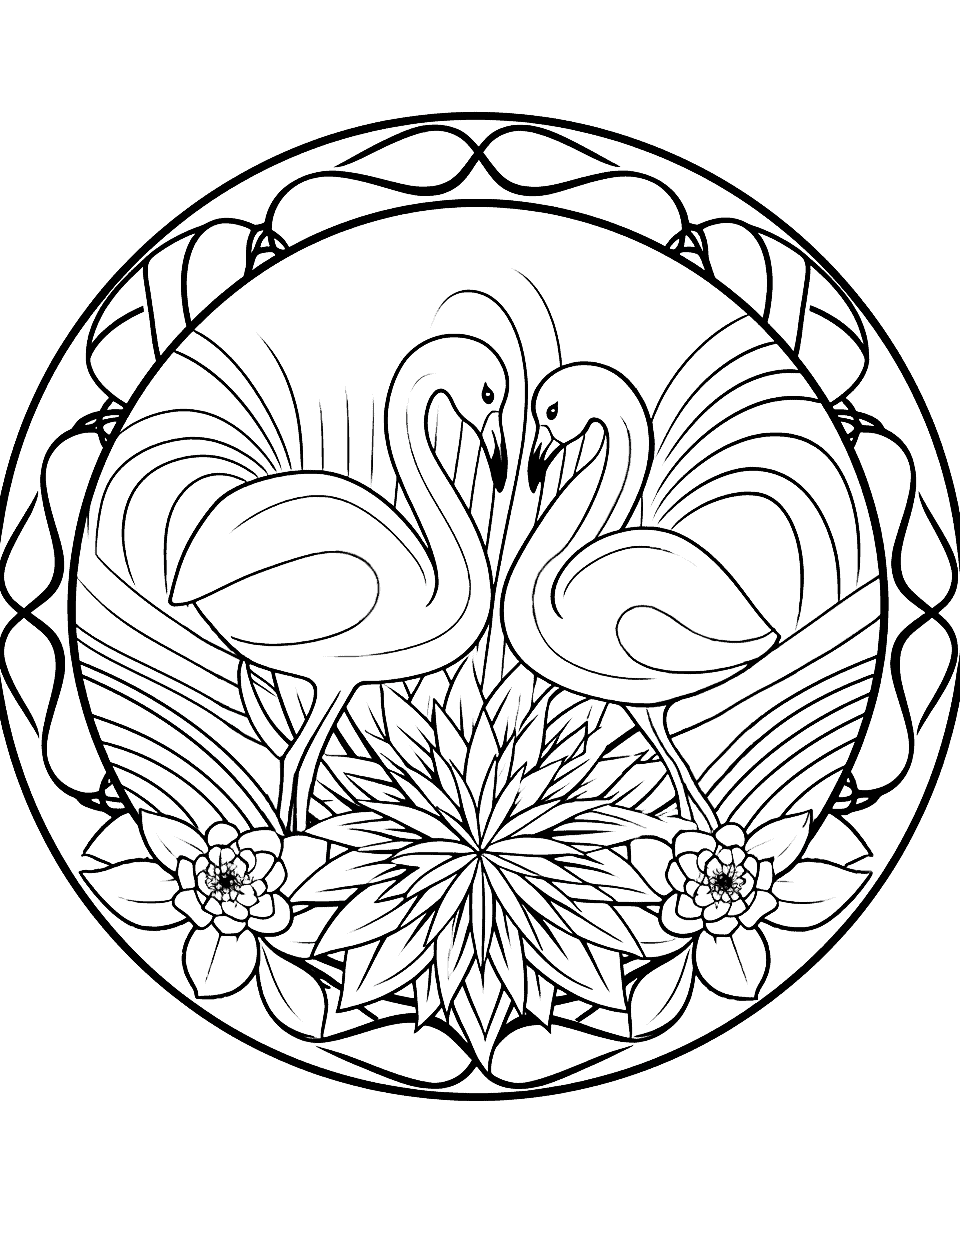 Tropical Flamingo Mandala Coloring Page - A cute mandala featuring flamingos in a tropical setting, great for young children.